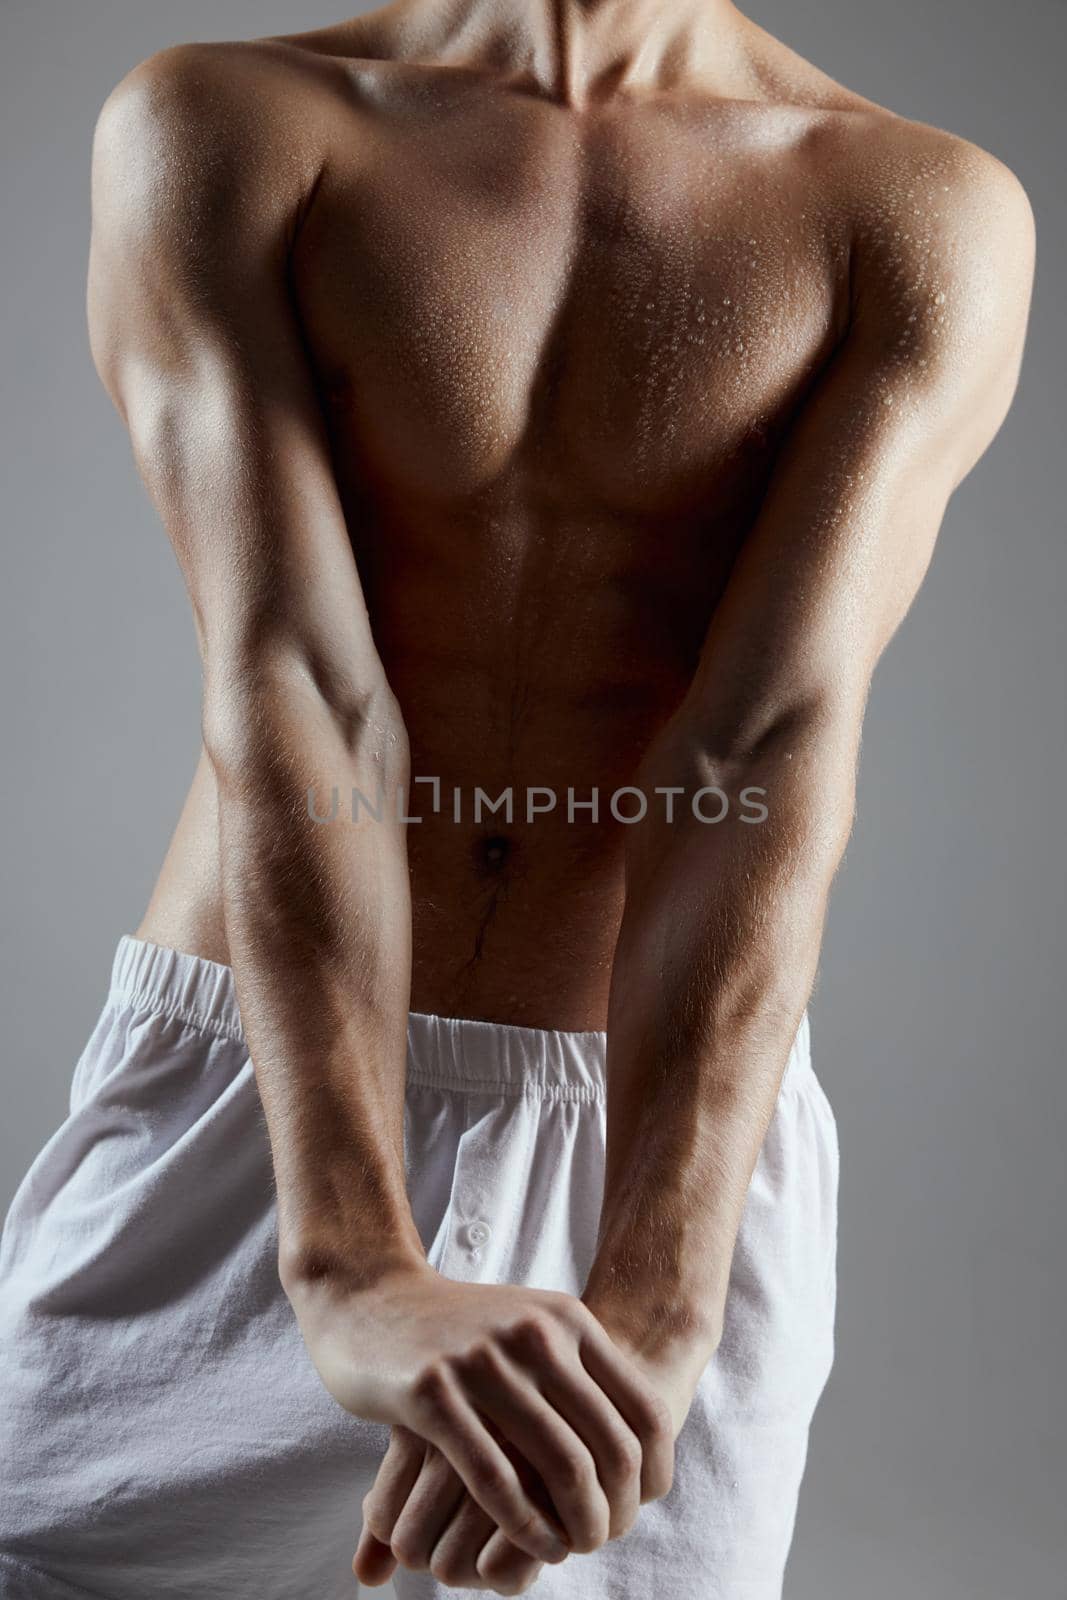 athlete with muscular body in white shorts joined hands on gray background. High quality photo